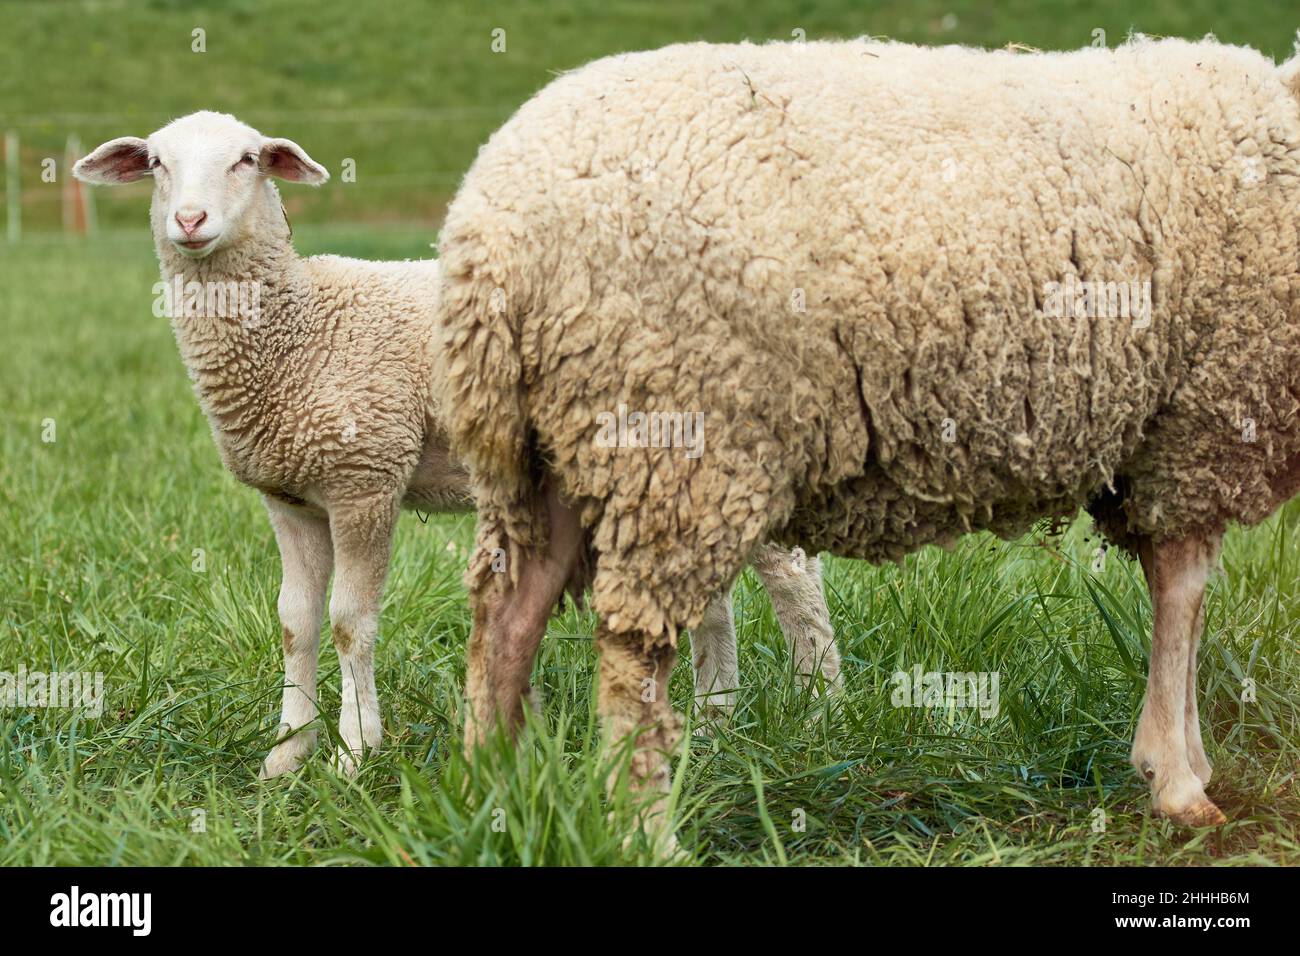 Close-up of a cute white lamb standing behind mother sheep in green grass field Stock Photo